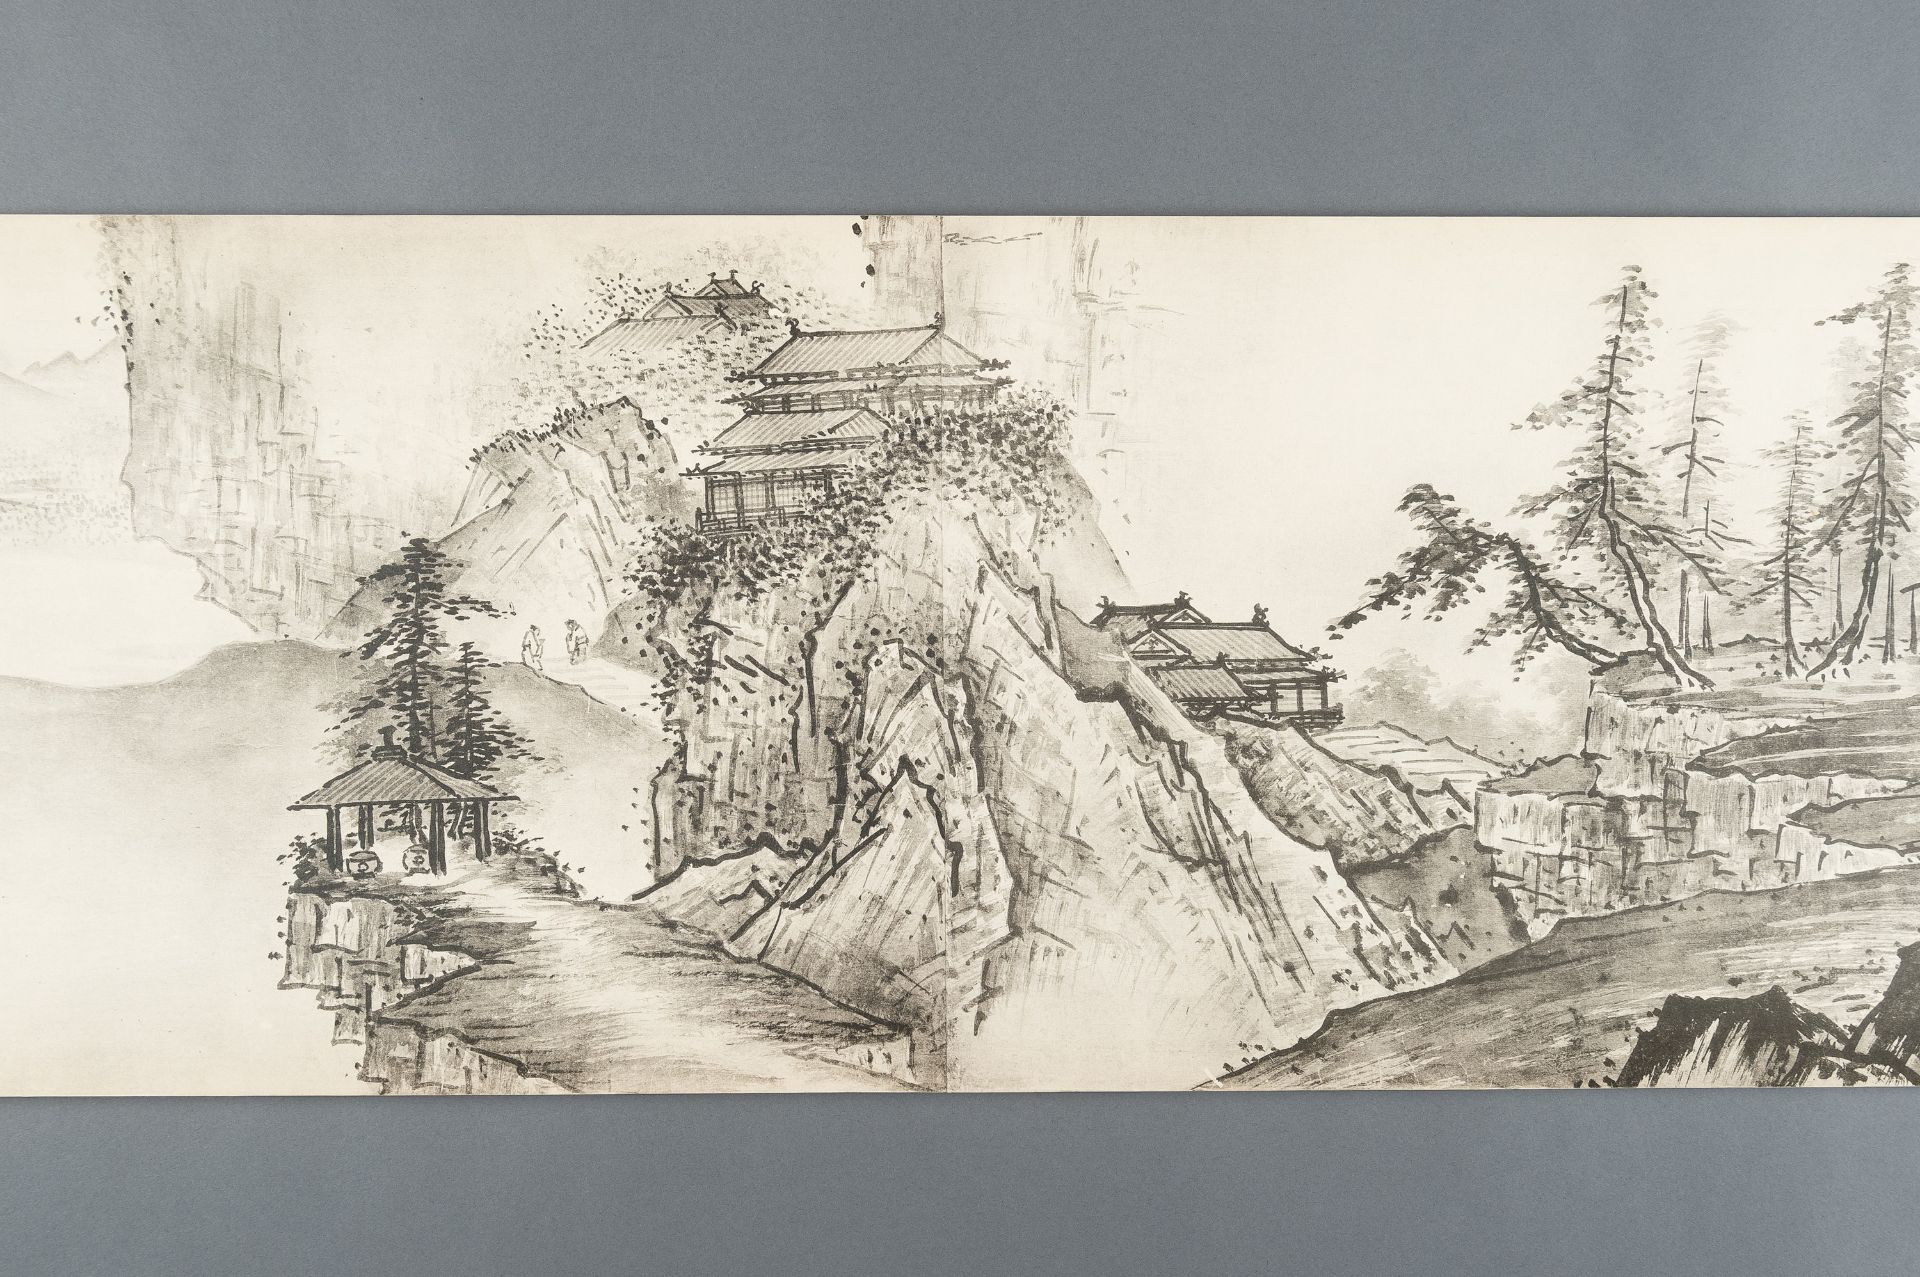 AFTER SESSHU TOYO: A VERY LONG PRINTED HANDSCROLL OF A LANDSCAPE